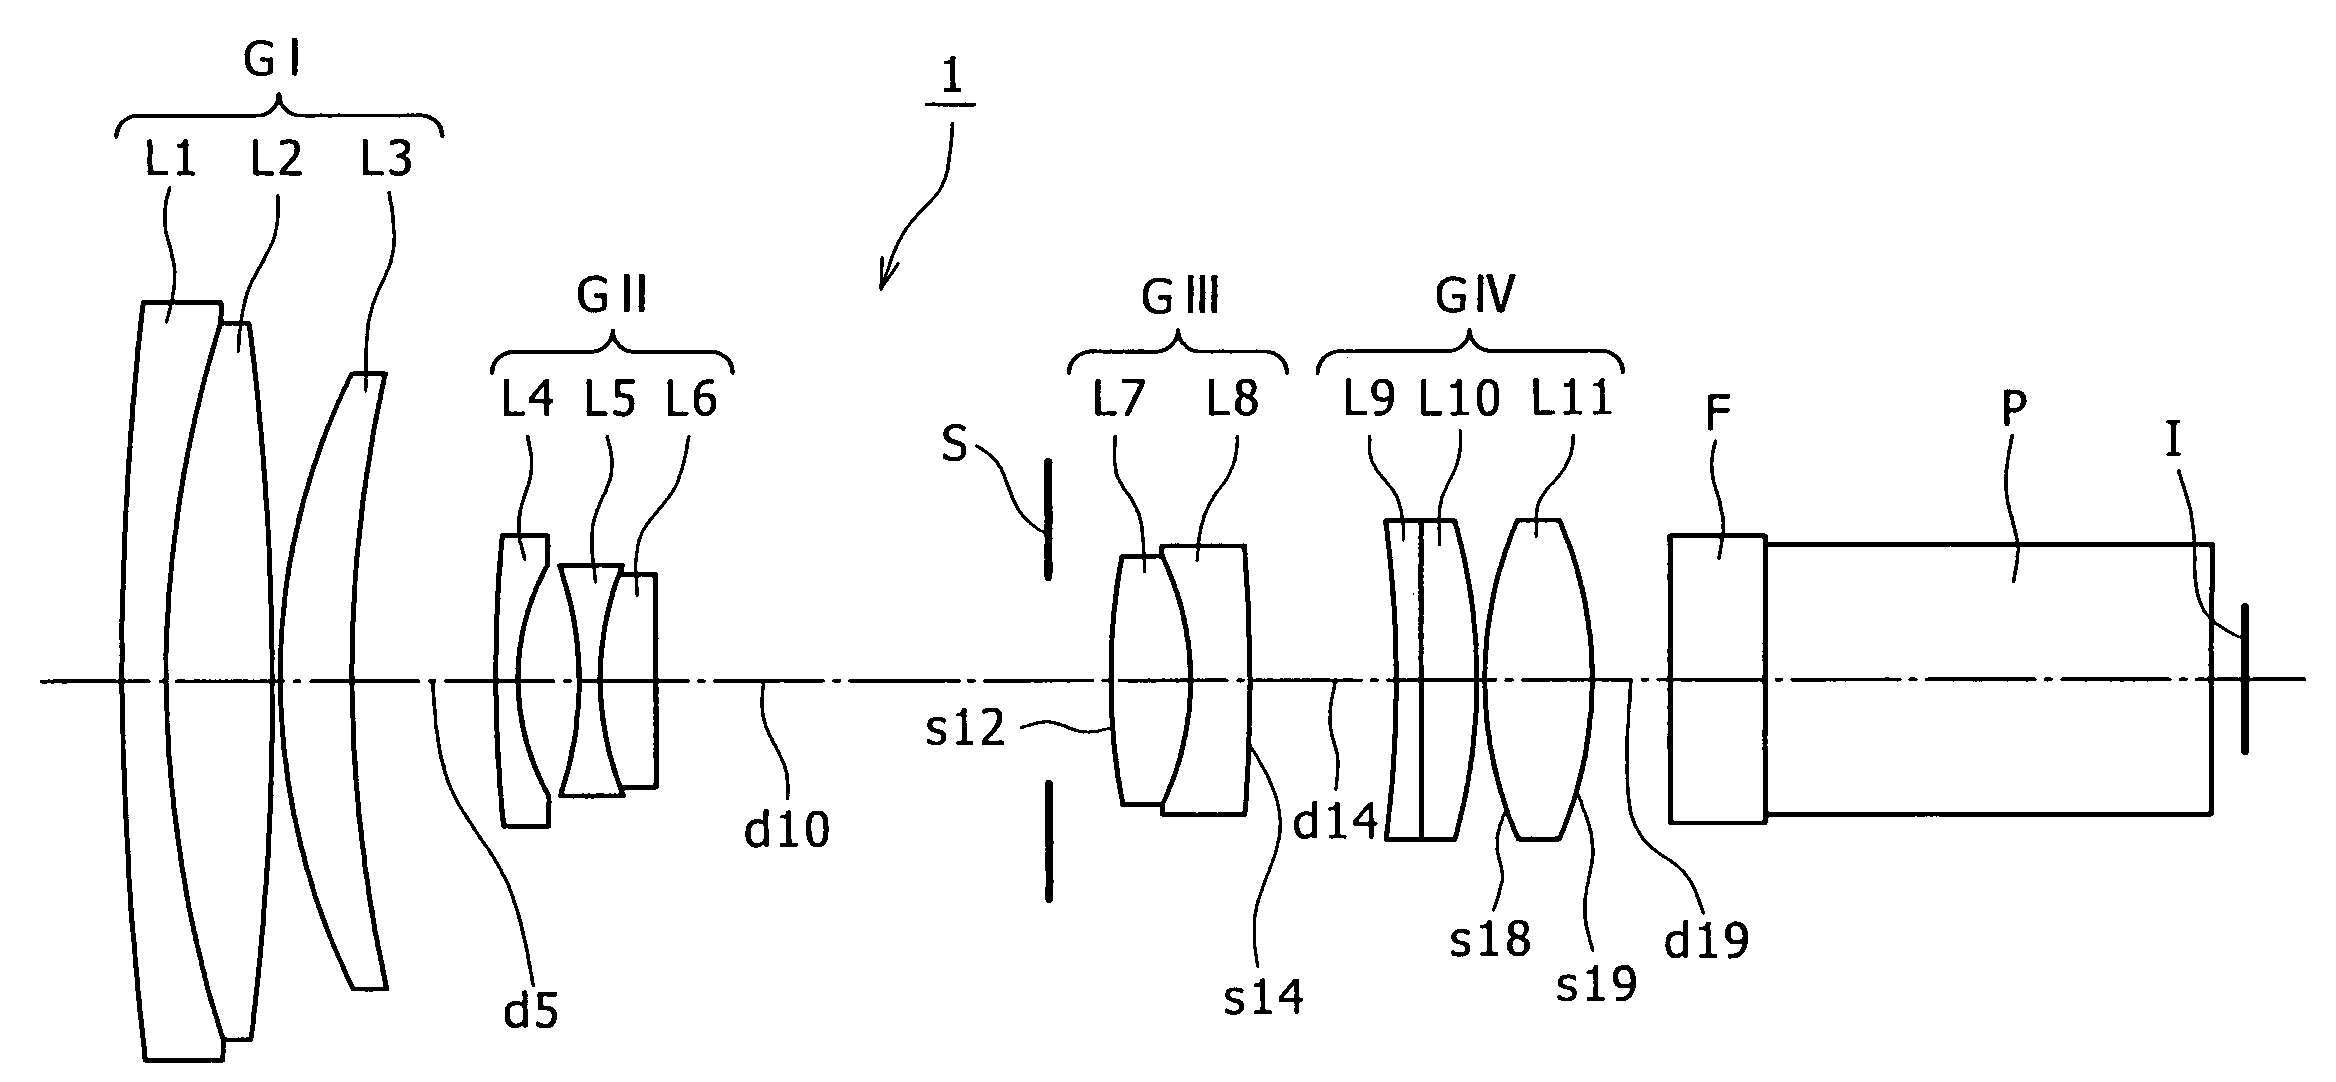 Zoom lens and image pickup apparatus